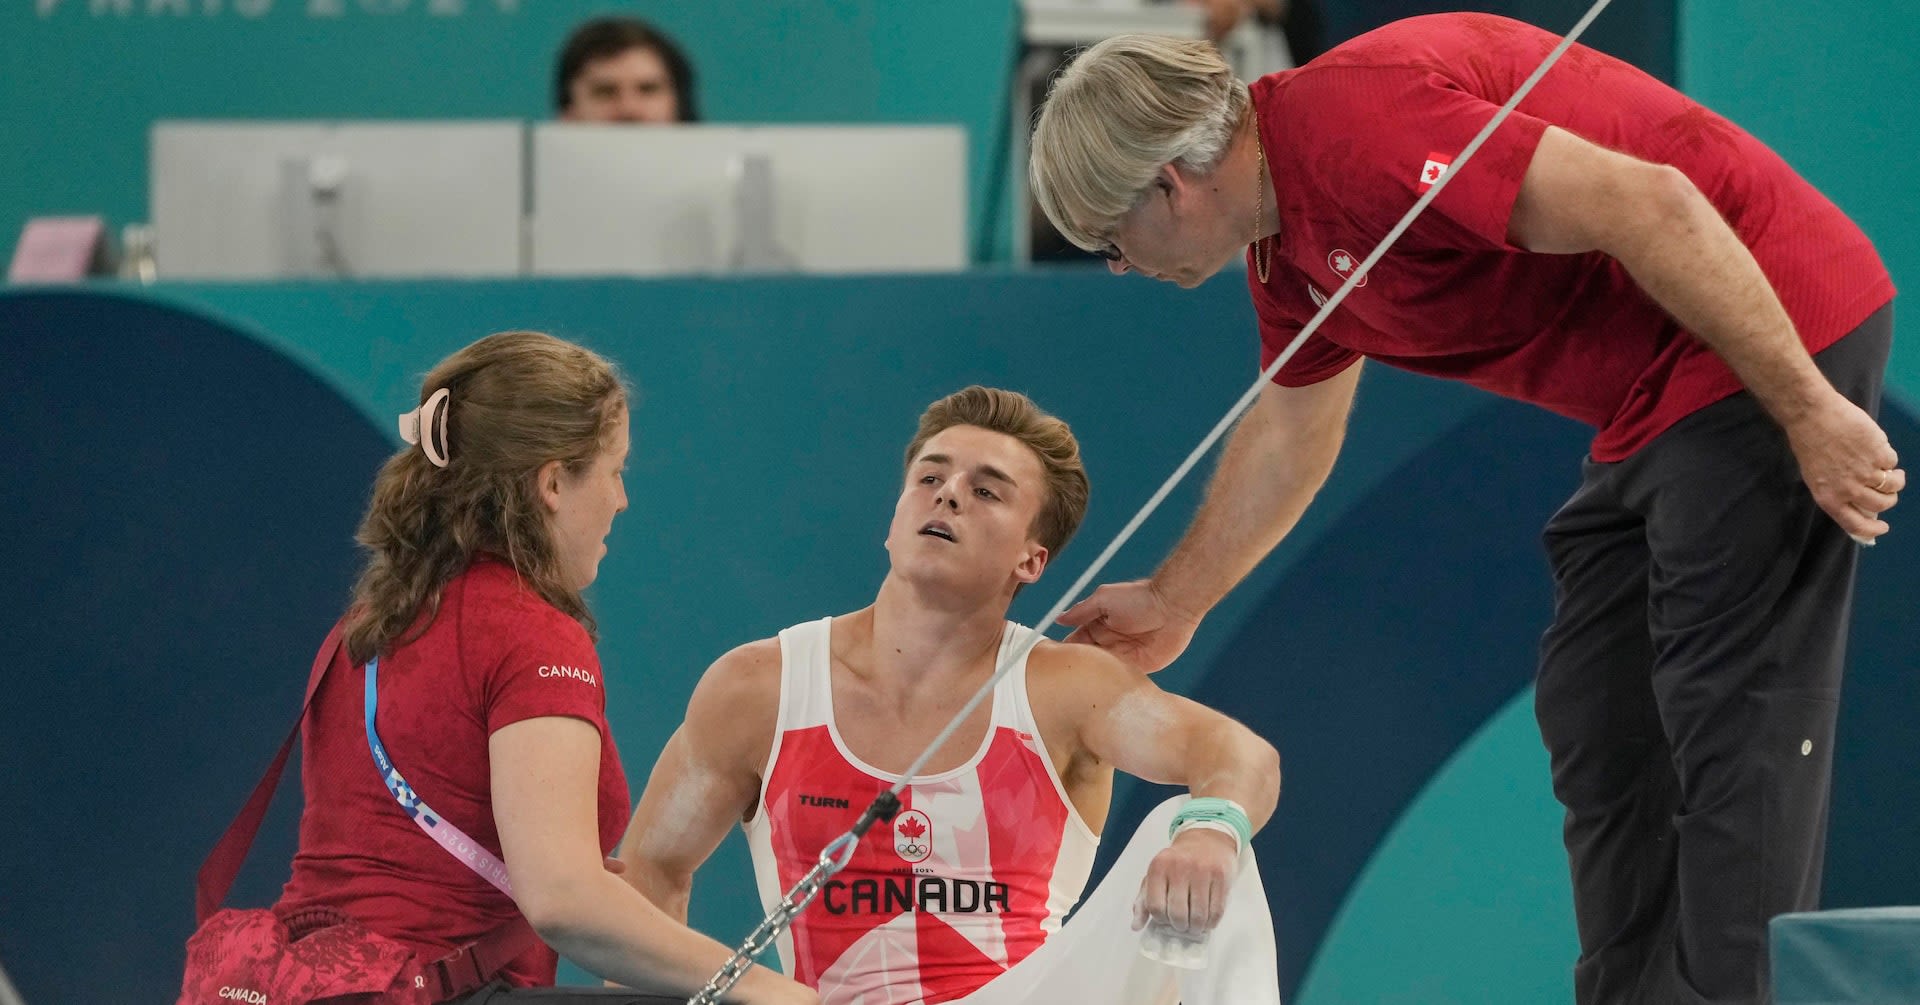 Gymnastics-Canada's Dolci gets second chance on bar after equipment malfunction